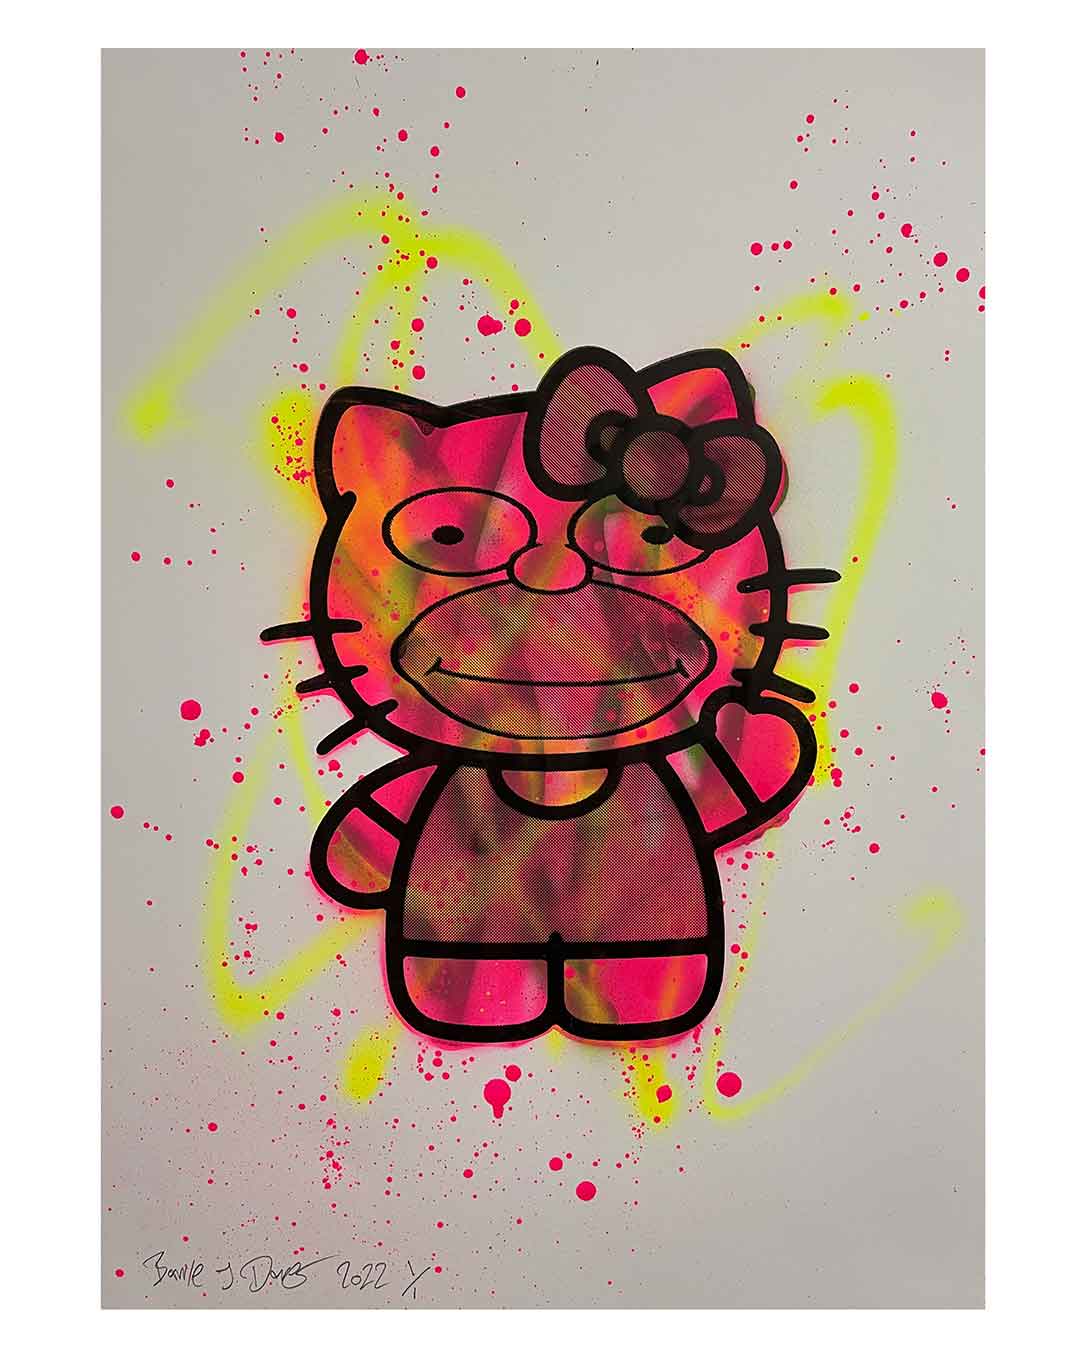 Meow Homer Mix Print by Barrie J Davies 2022 - unframed Silkscreen print on paper (hand finished) edition of 1/1 - A2 size 42cm x 59.4cm.